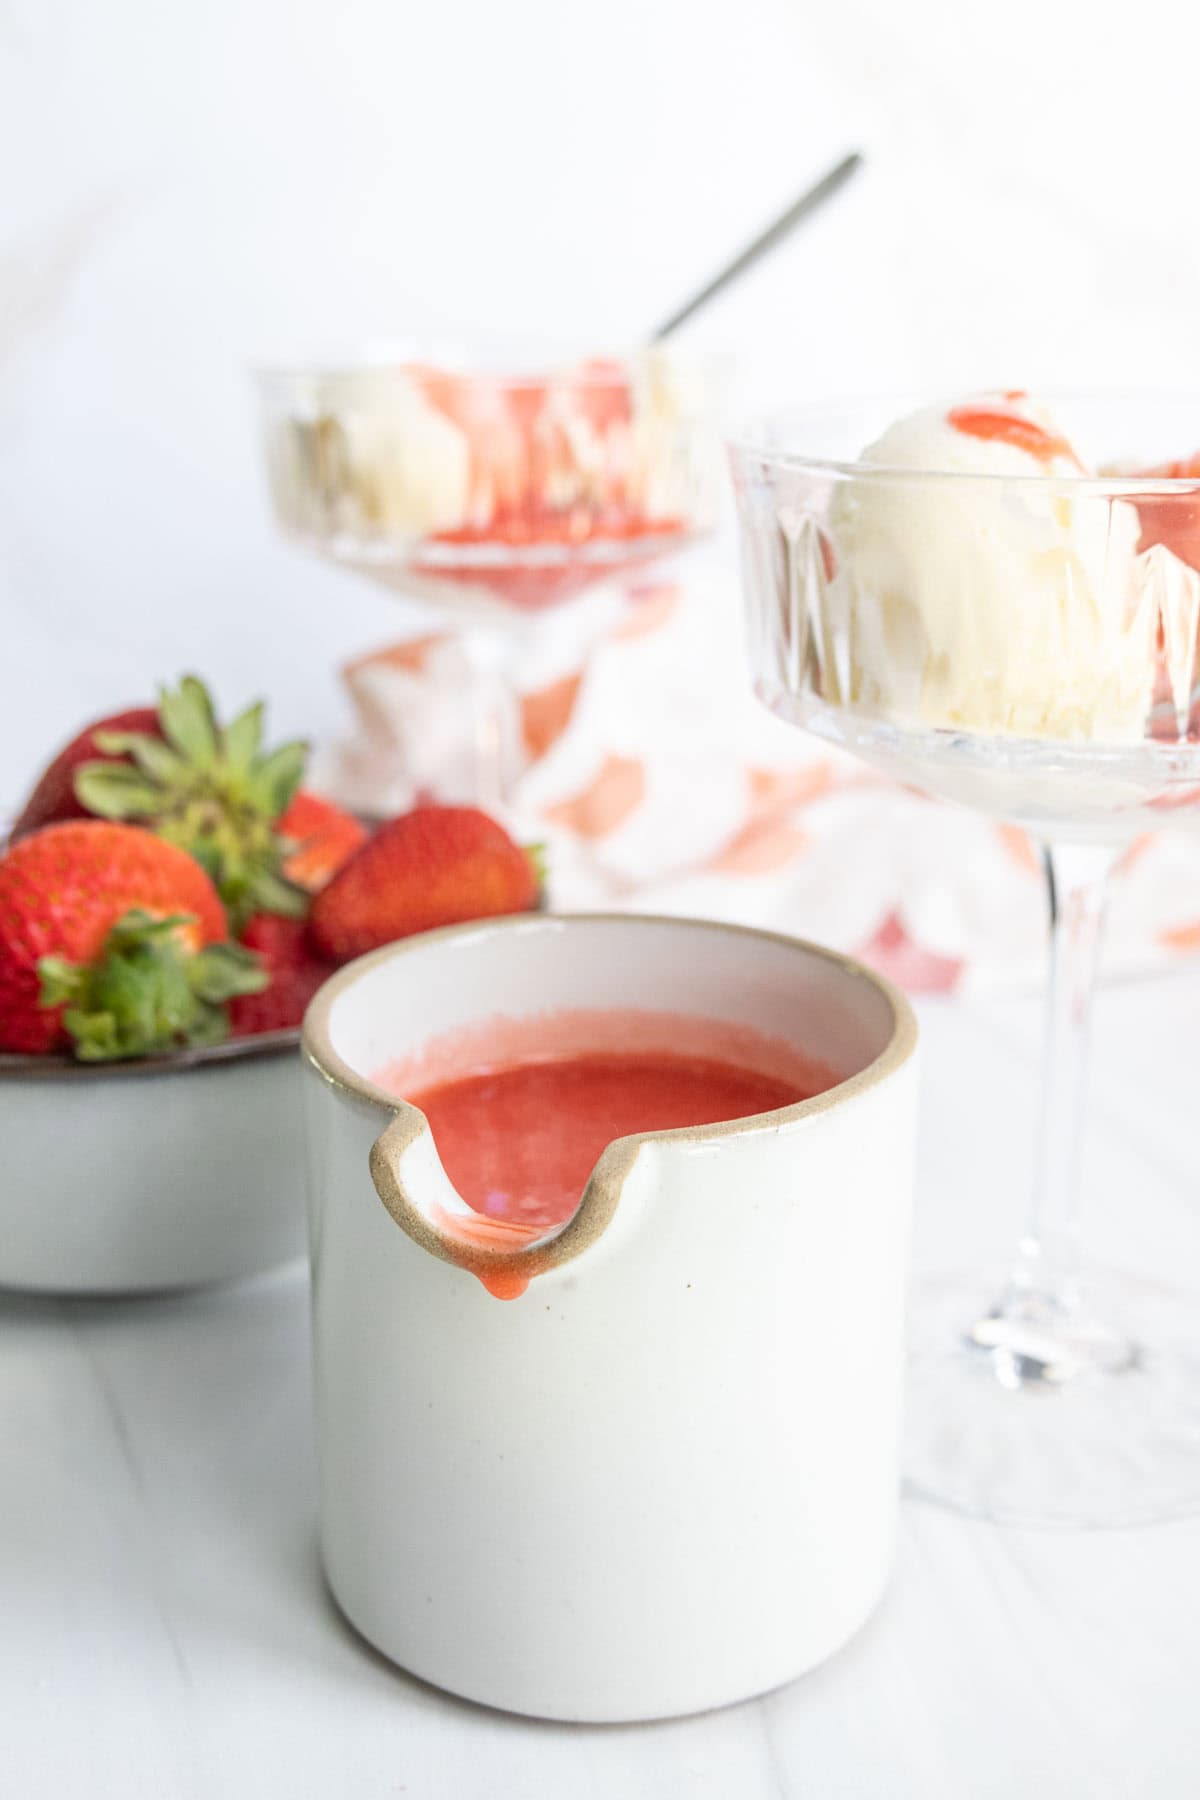 A ceramic pot of strawberry sauce with fresh strawberries, a bowl of whipped cream, and dessert glasses in the background on a white surface.